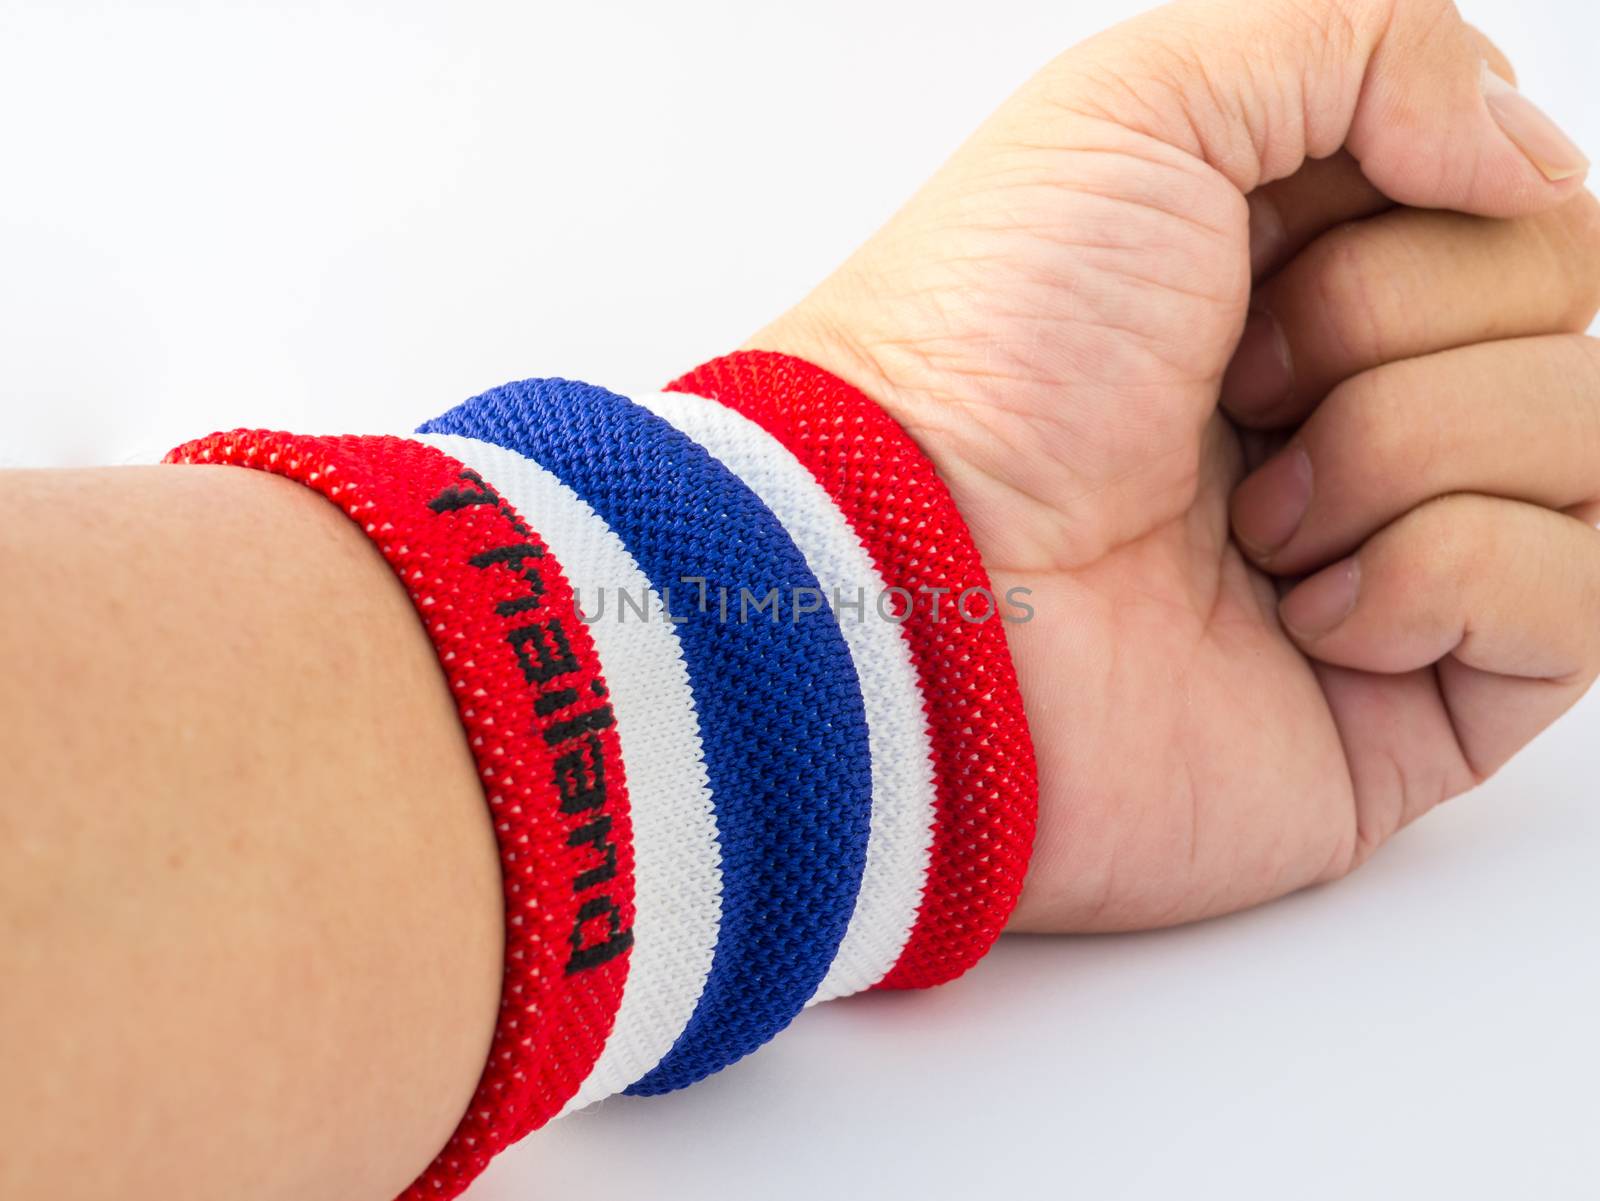 the wristband have colourful made of a towel-like terrycloth material. These are usually used to wipe sweat from the forehead during sport, or as a badge or fashion statement.